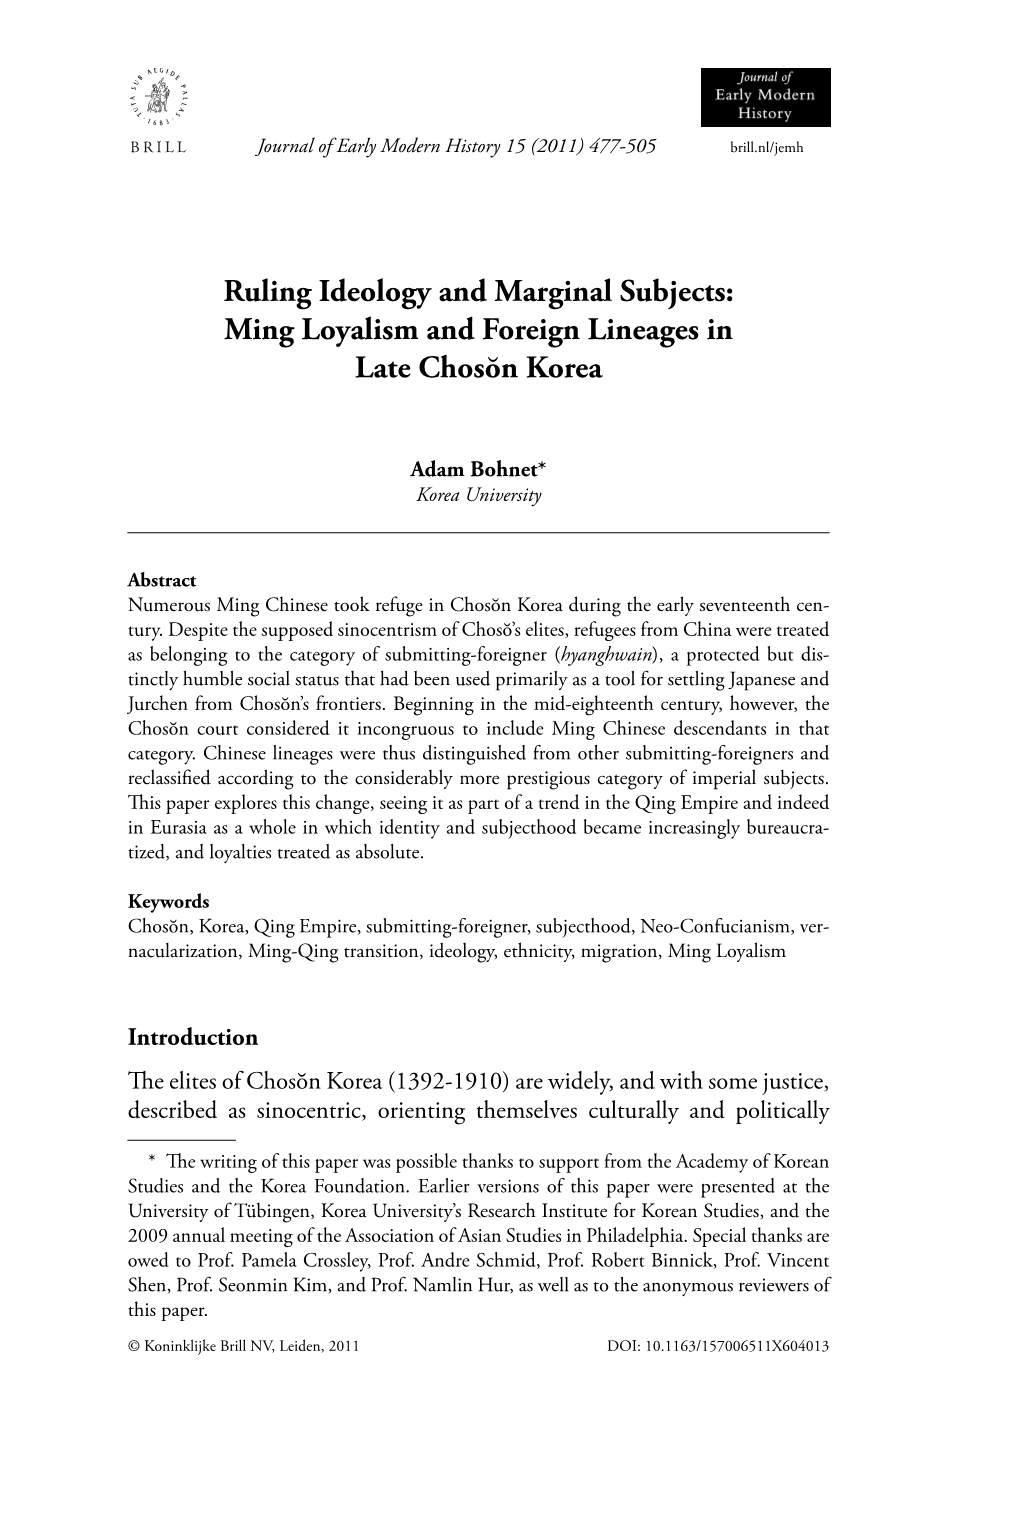 Ruling Ideology and Marginal Subjects: Ming Loyalism and Foreign Lineages in Late Chosŏn Korea